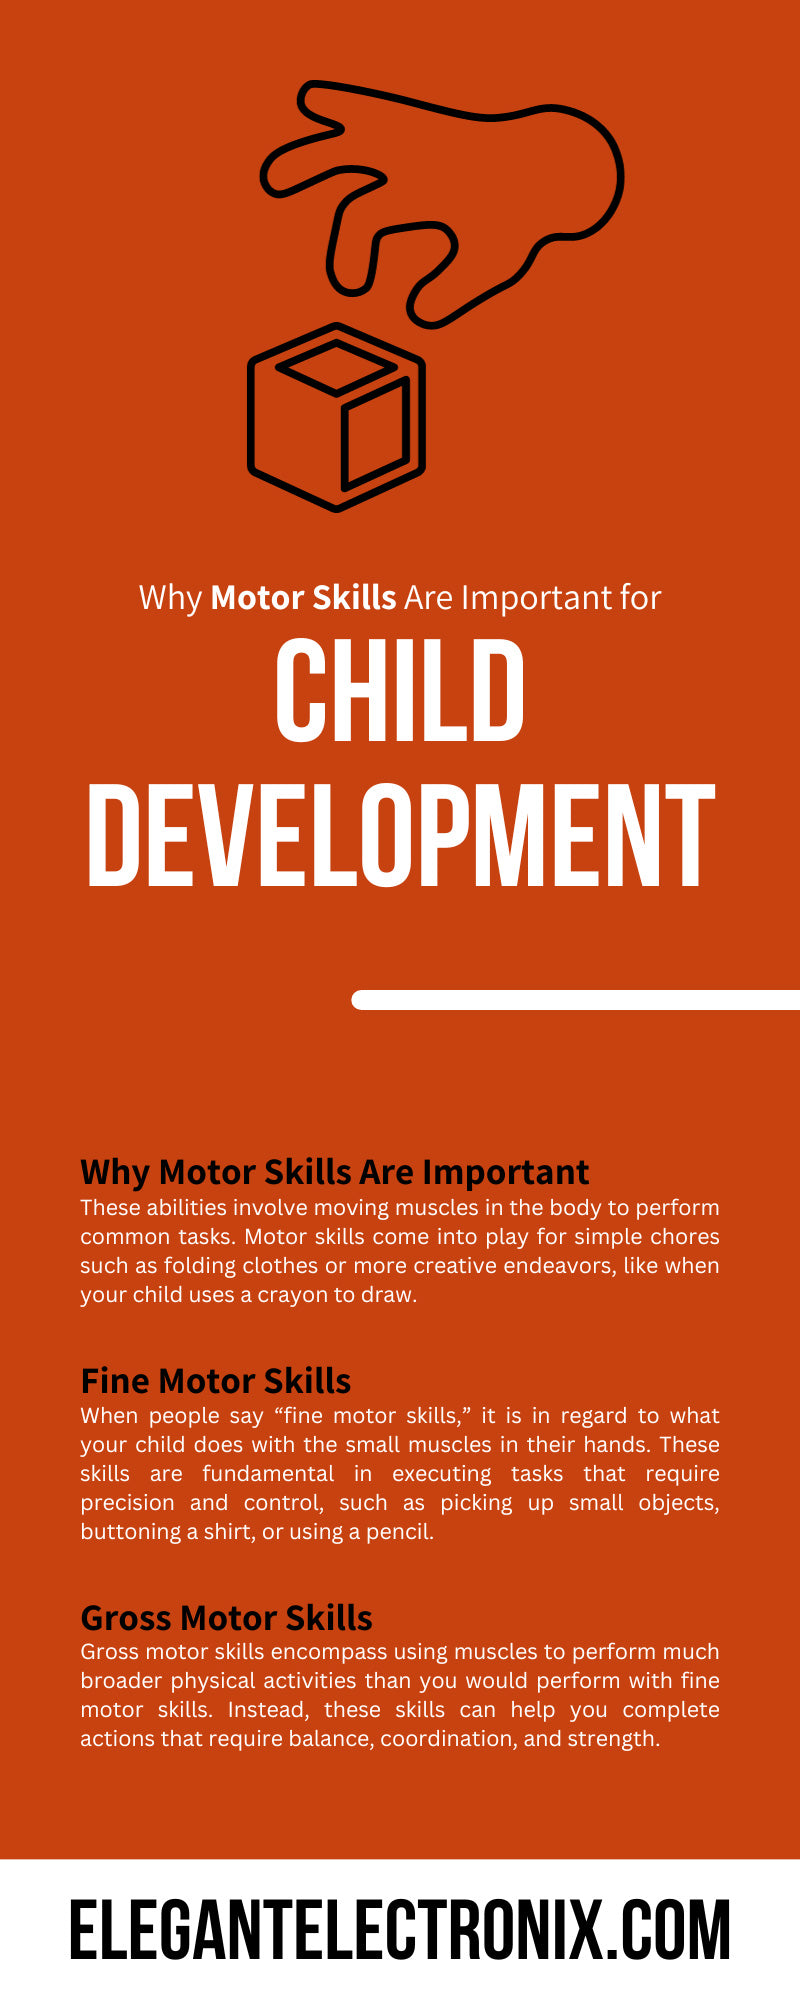 Why Motor Skills Are Important for Child Development